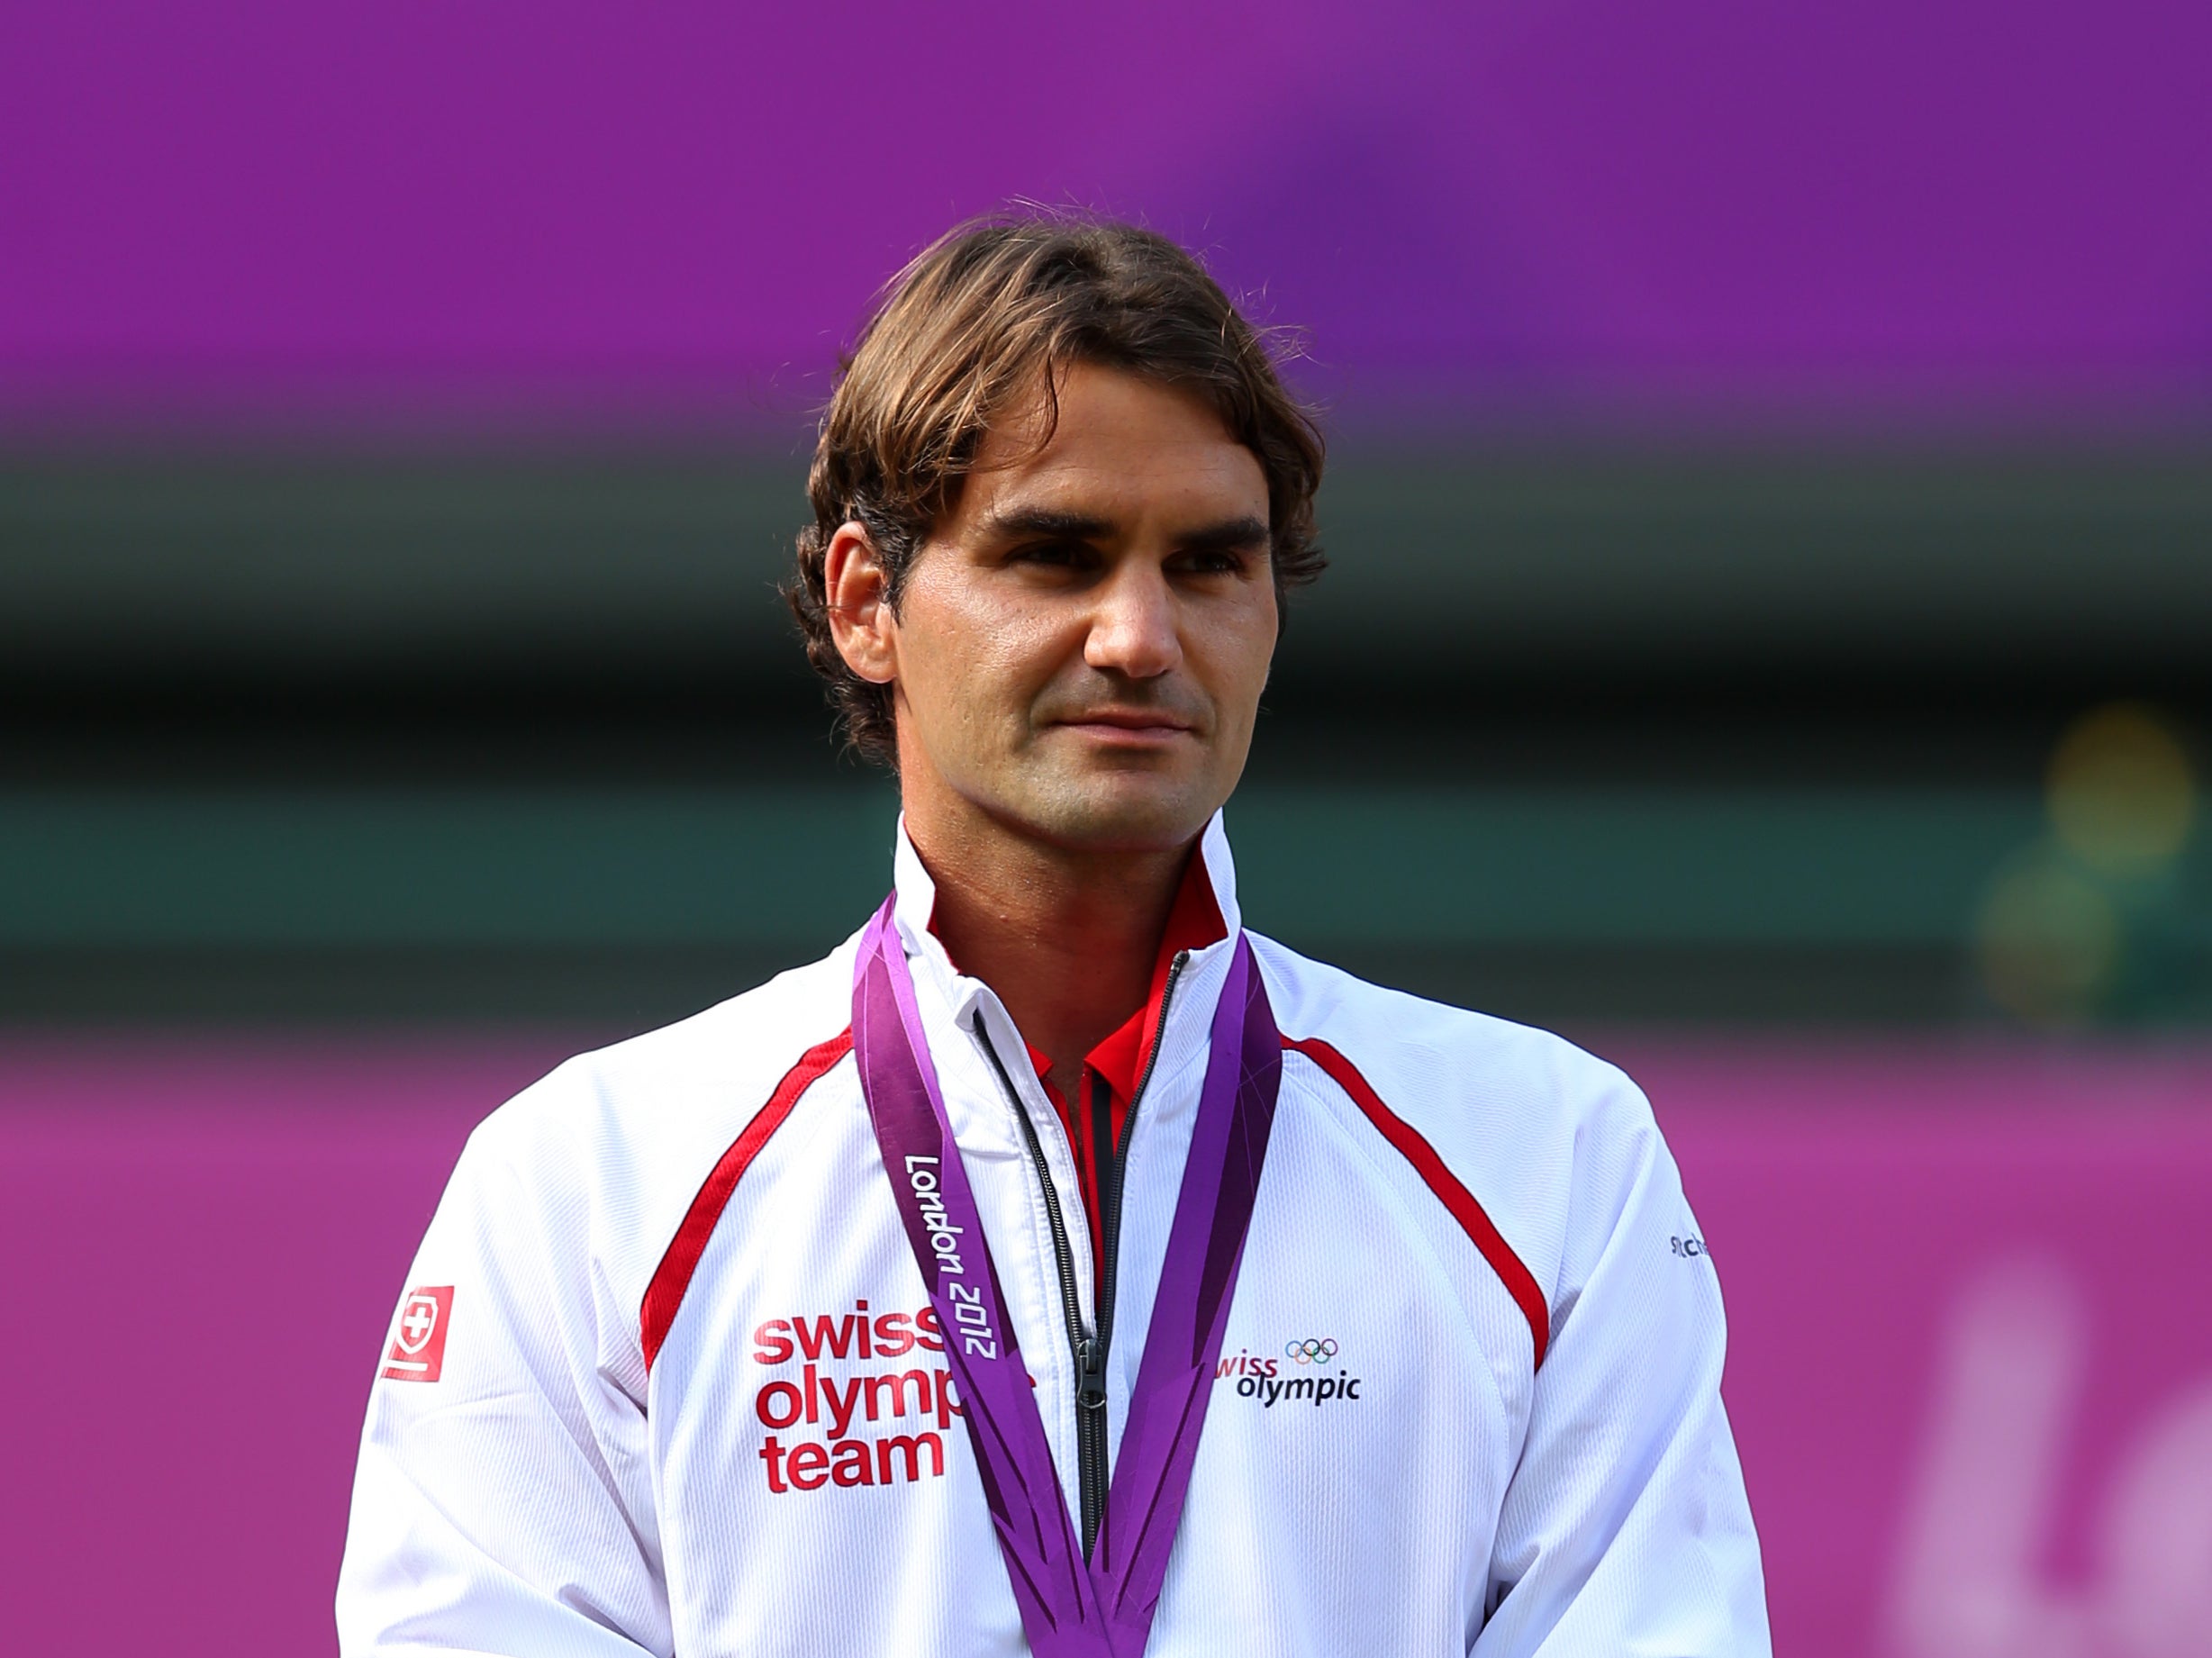 Roger Federer after winning silver in the men’s singles at London 2012